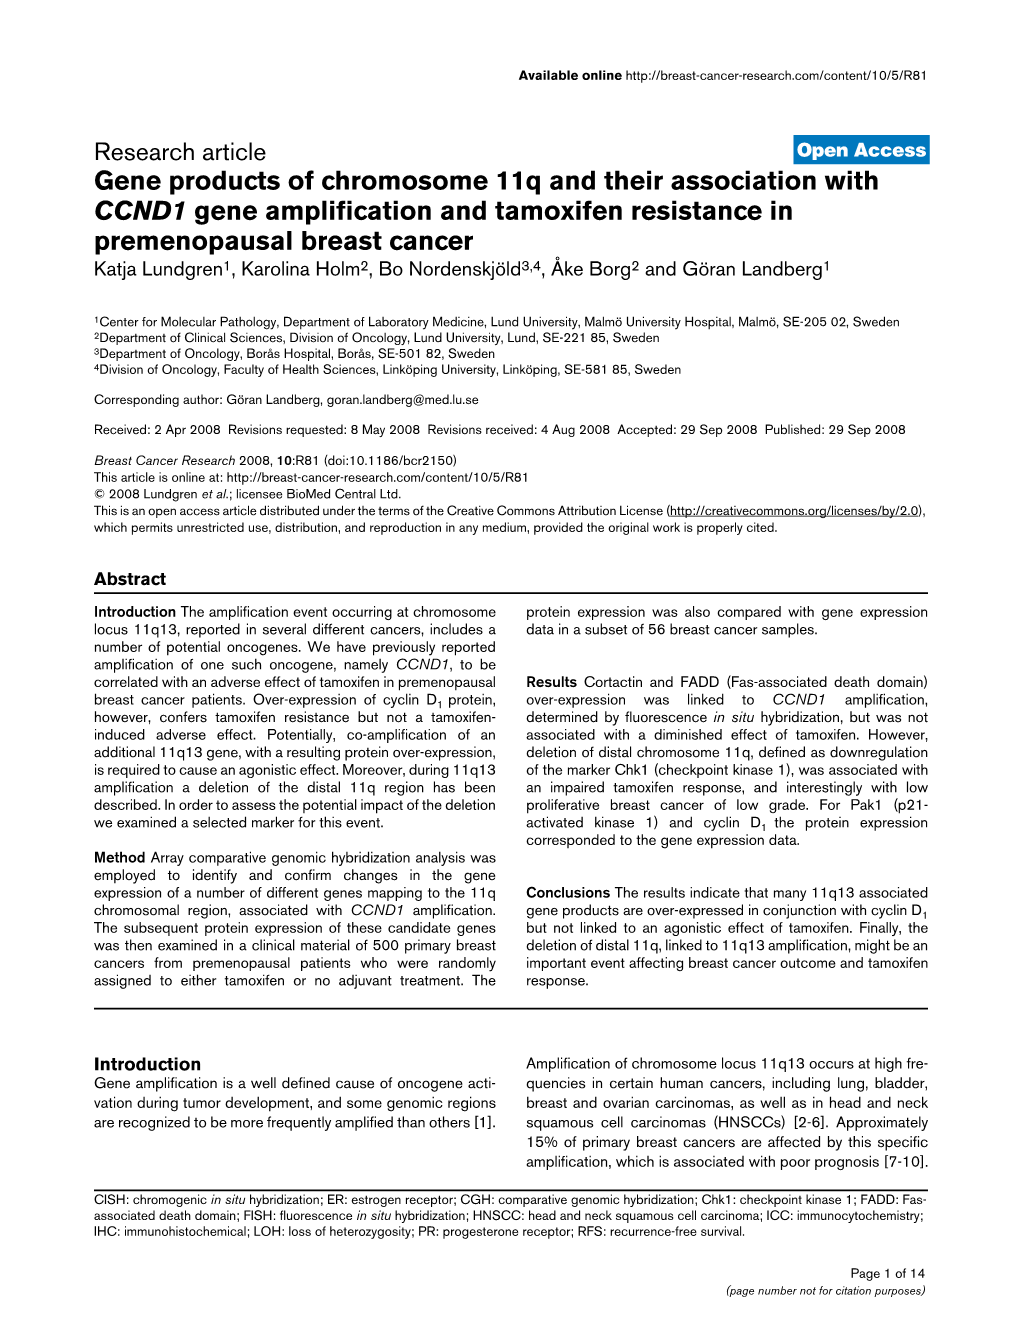 Gene Products of Chromosome 11Q and Their Association with CCND1